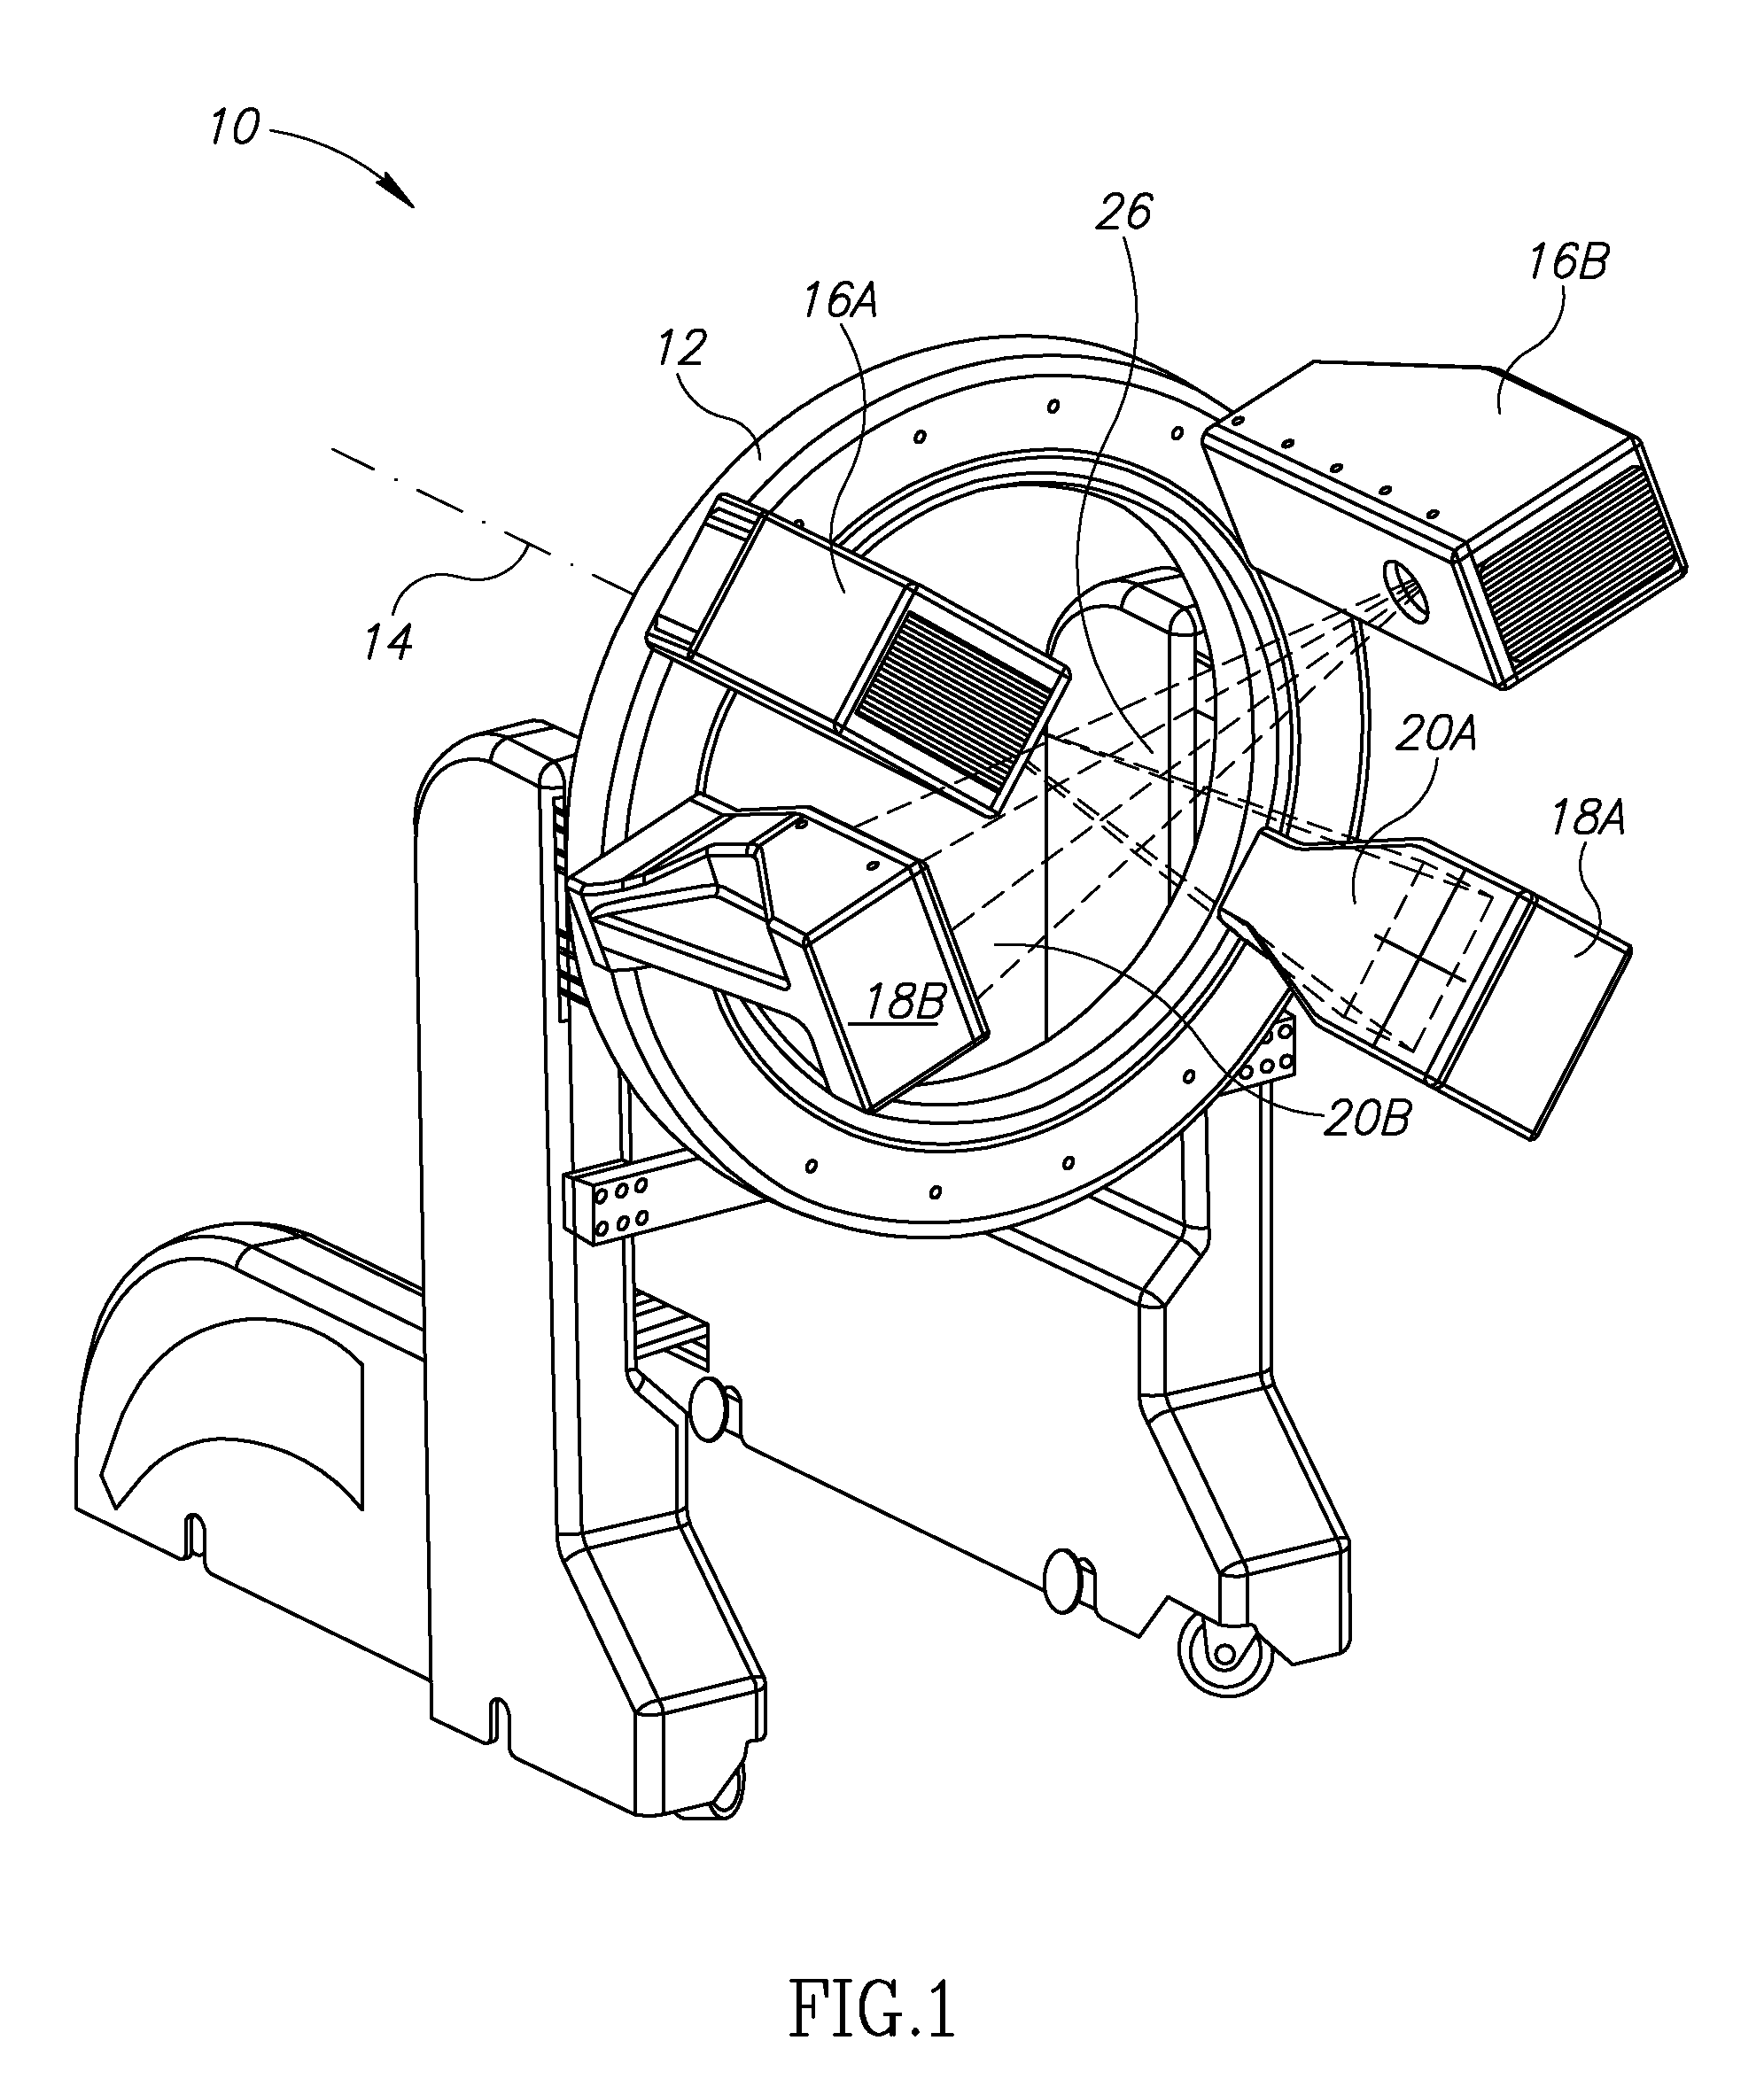 CT scanning system with interlapping beams